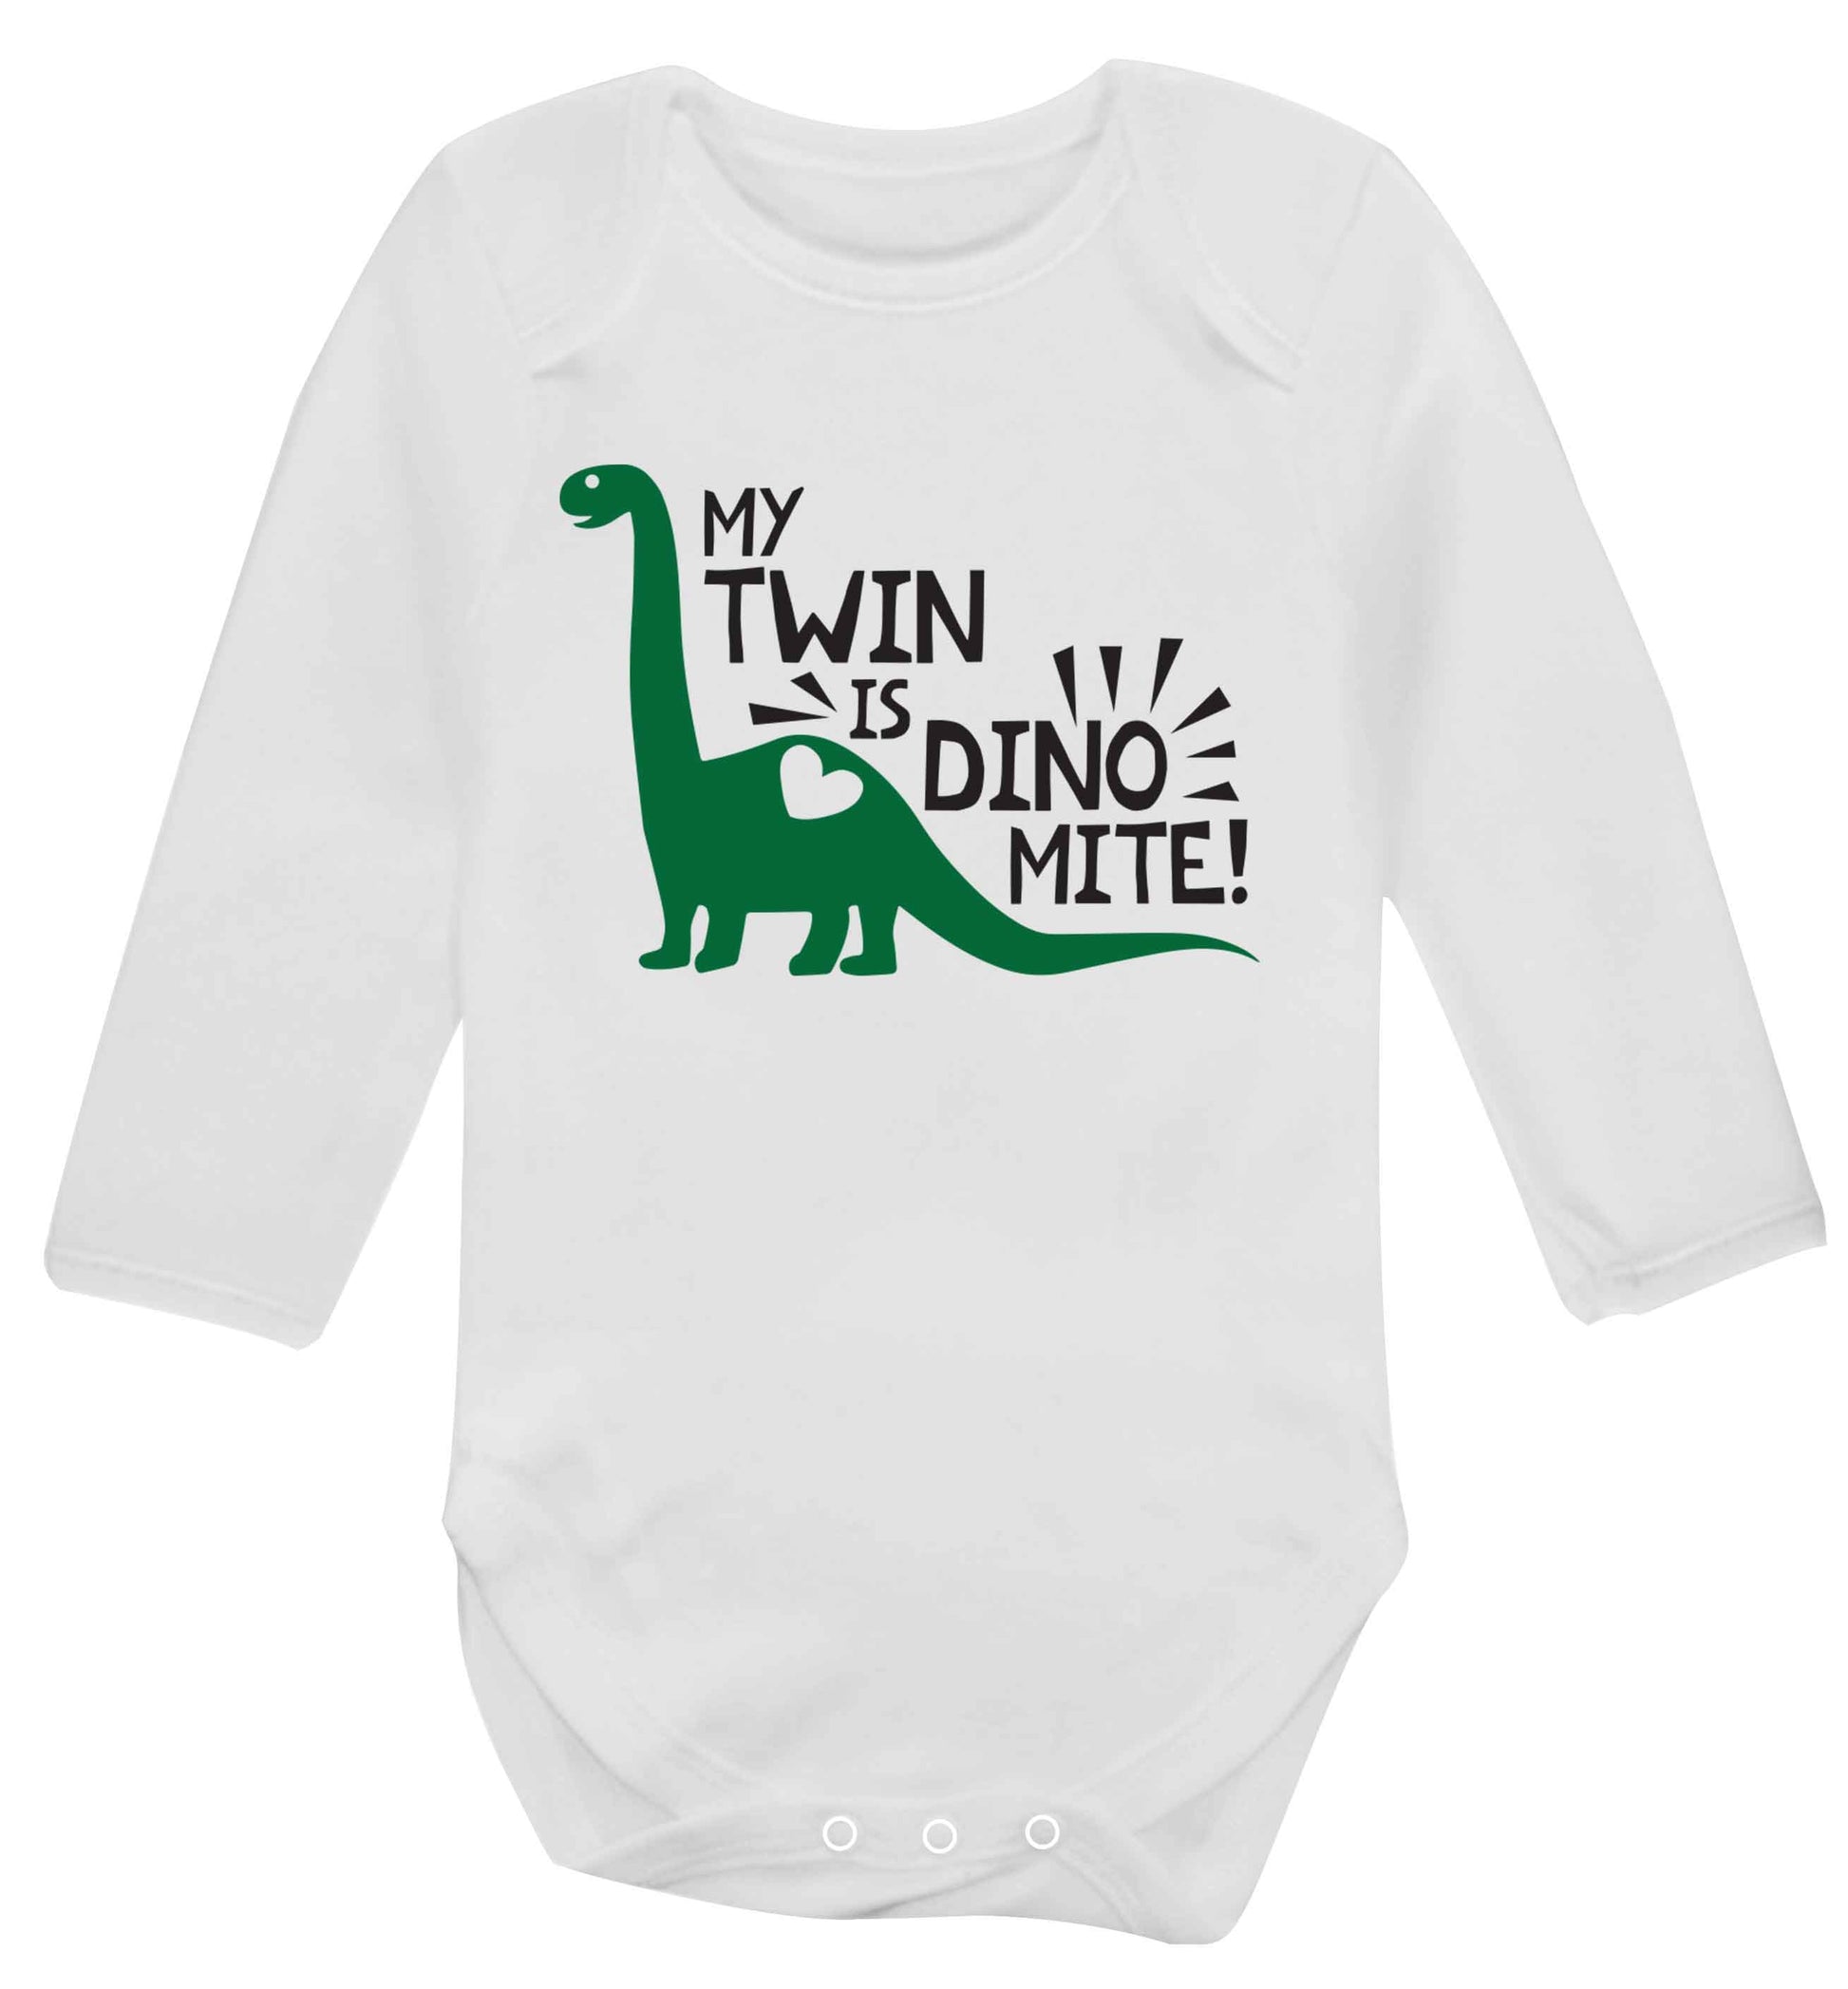 My twin is dinomite! Baby Vest long sleeved white 6-12 months